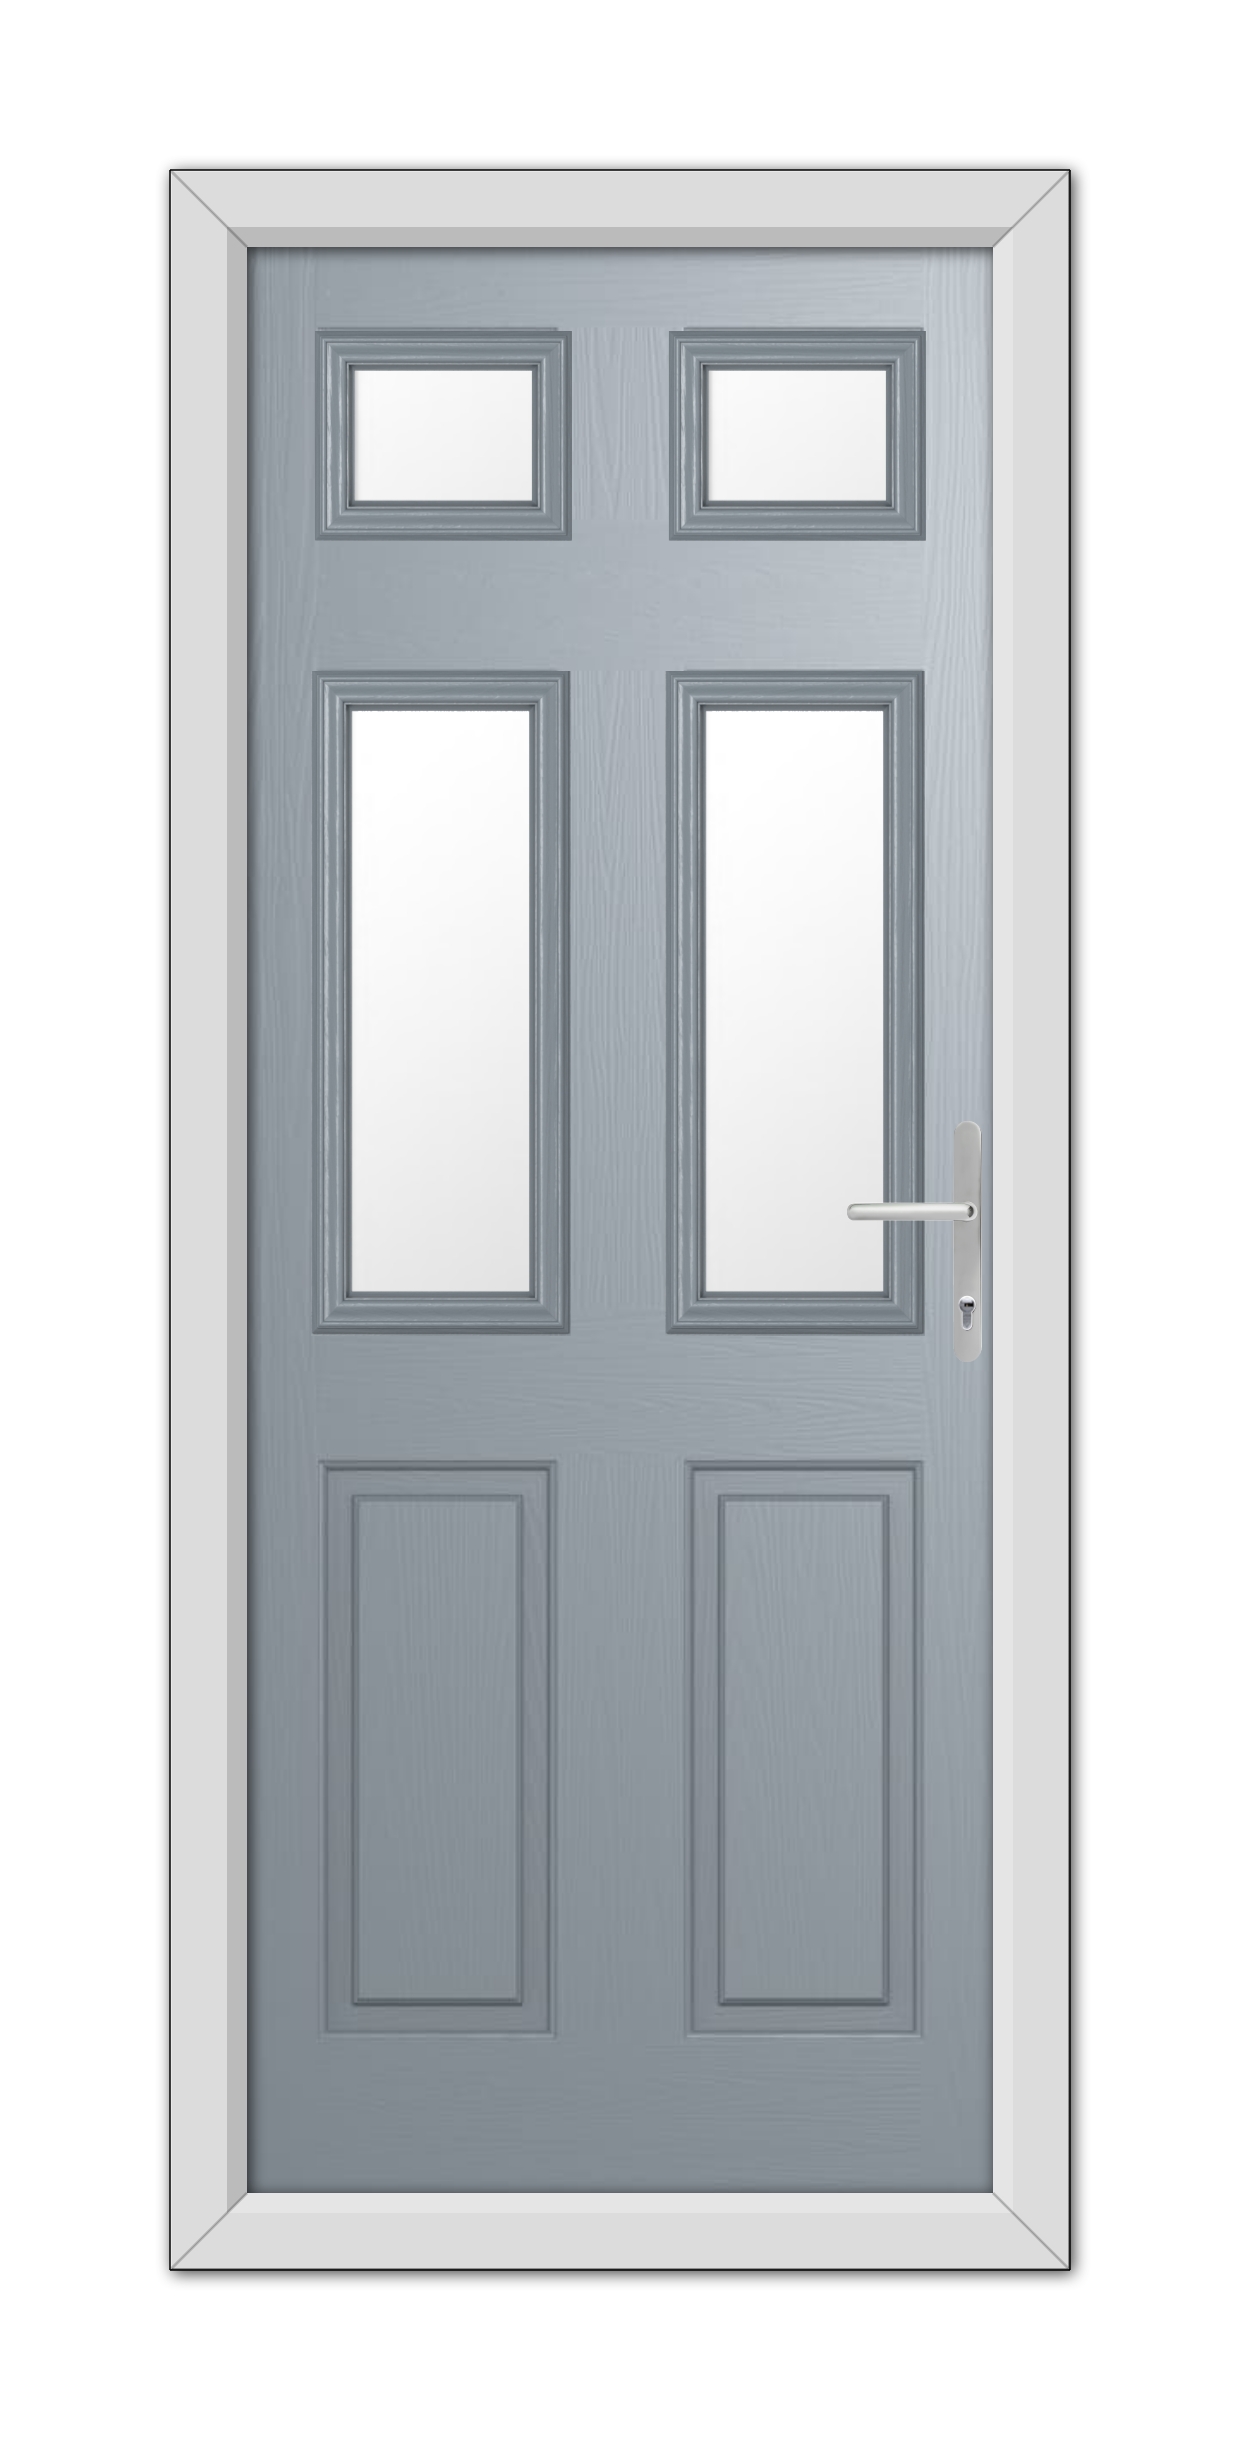 A modern French Grey Middleton Glazed 4 Composite Door 48mm Timber Core featuring a silver handle, with four rectangular frosted glass panels arranged symmetrically.